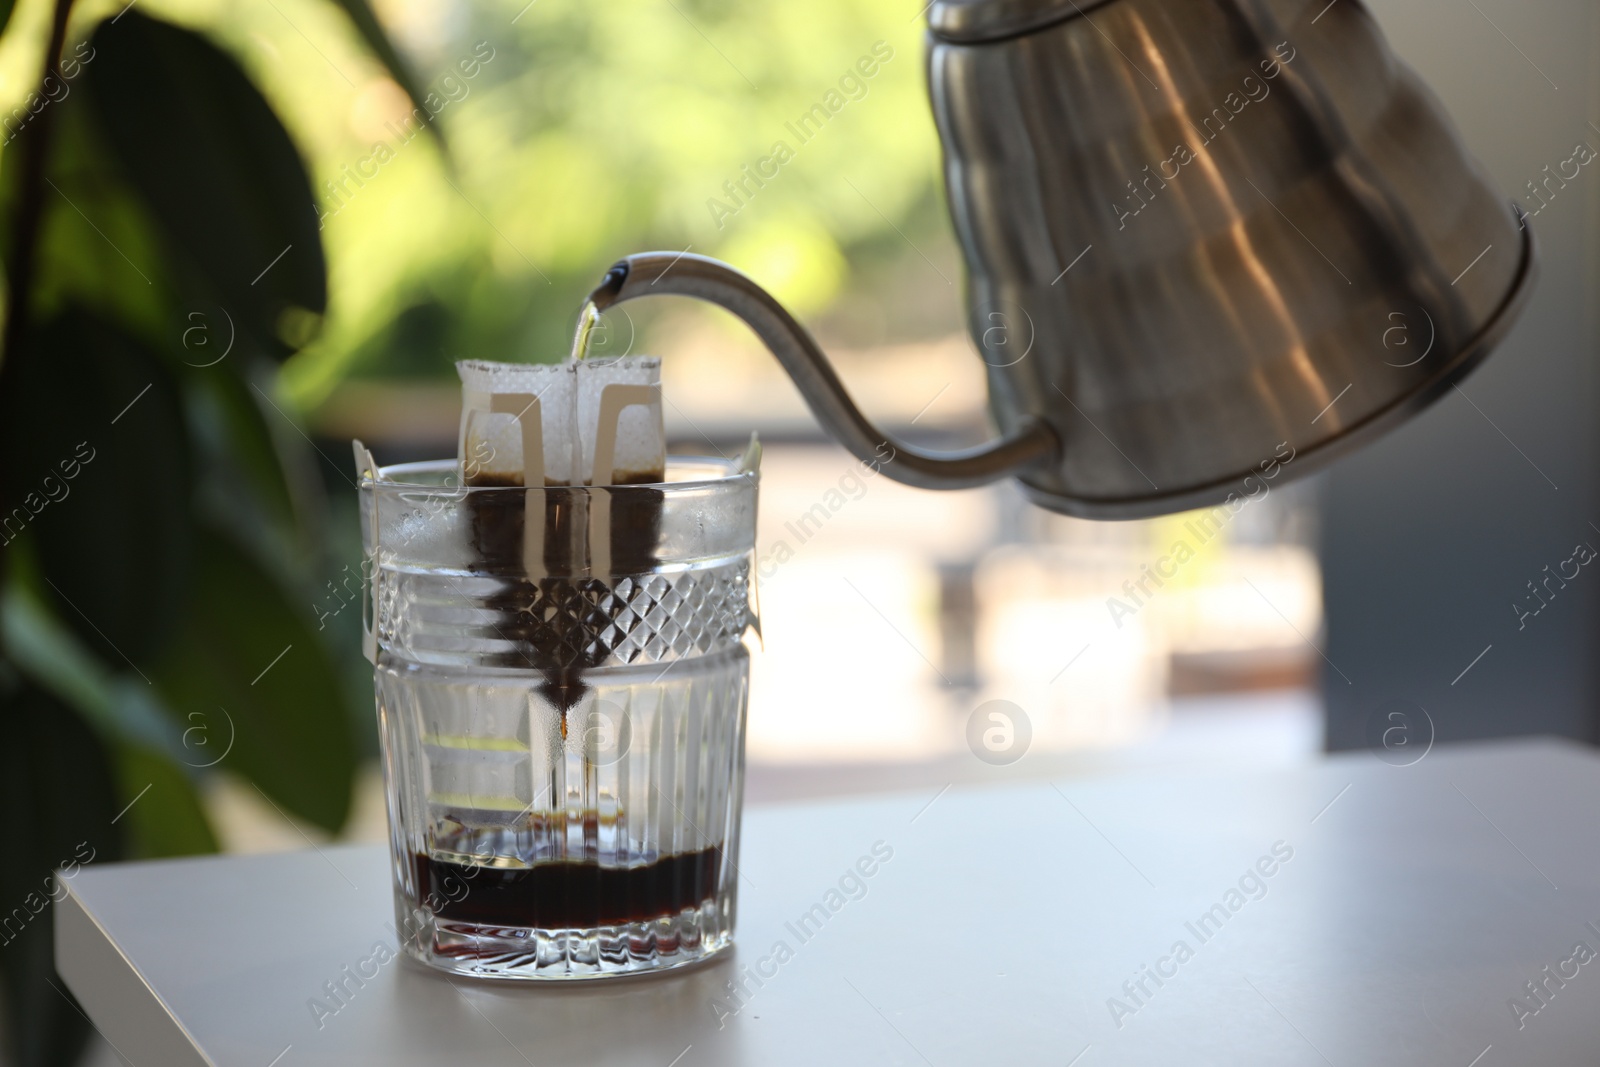 Photo of Pouring hot water into glass with drip coffee bag from kettle on white table